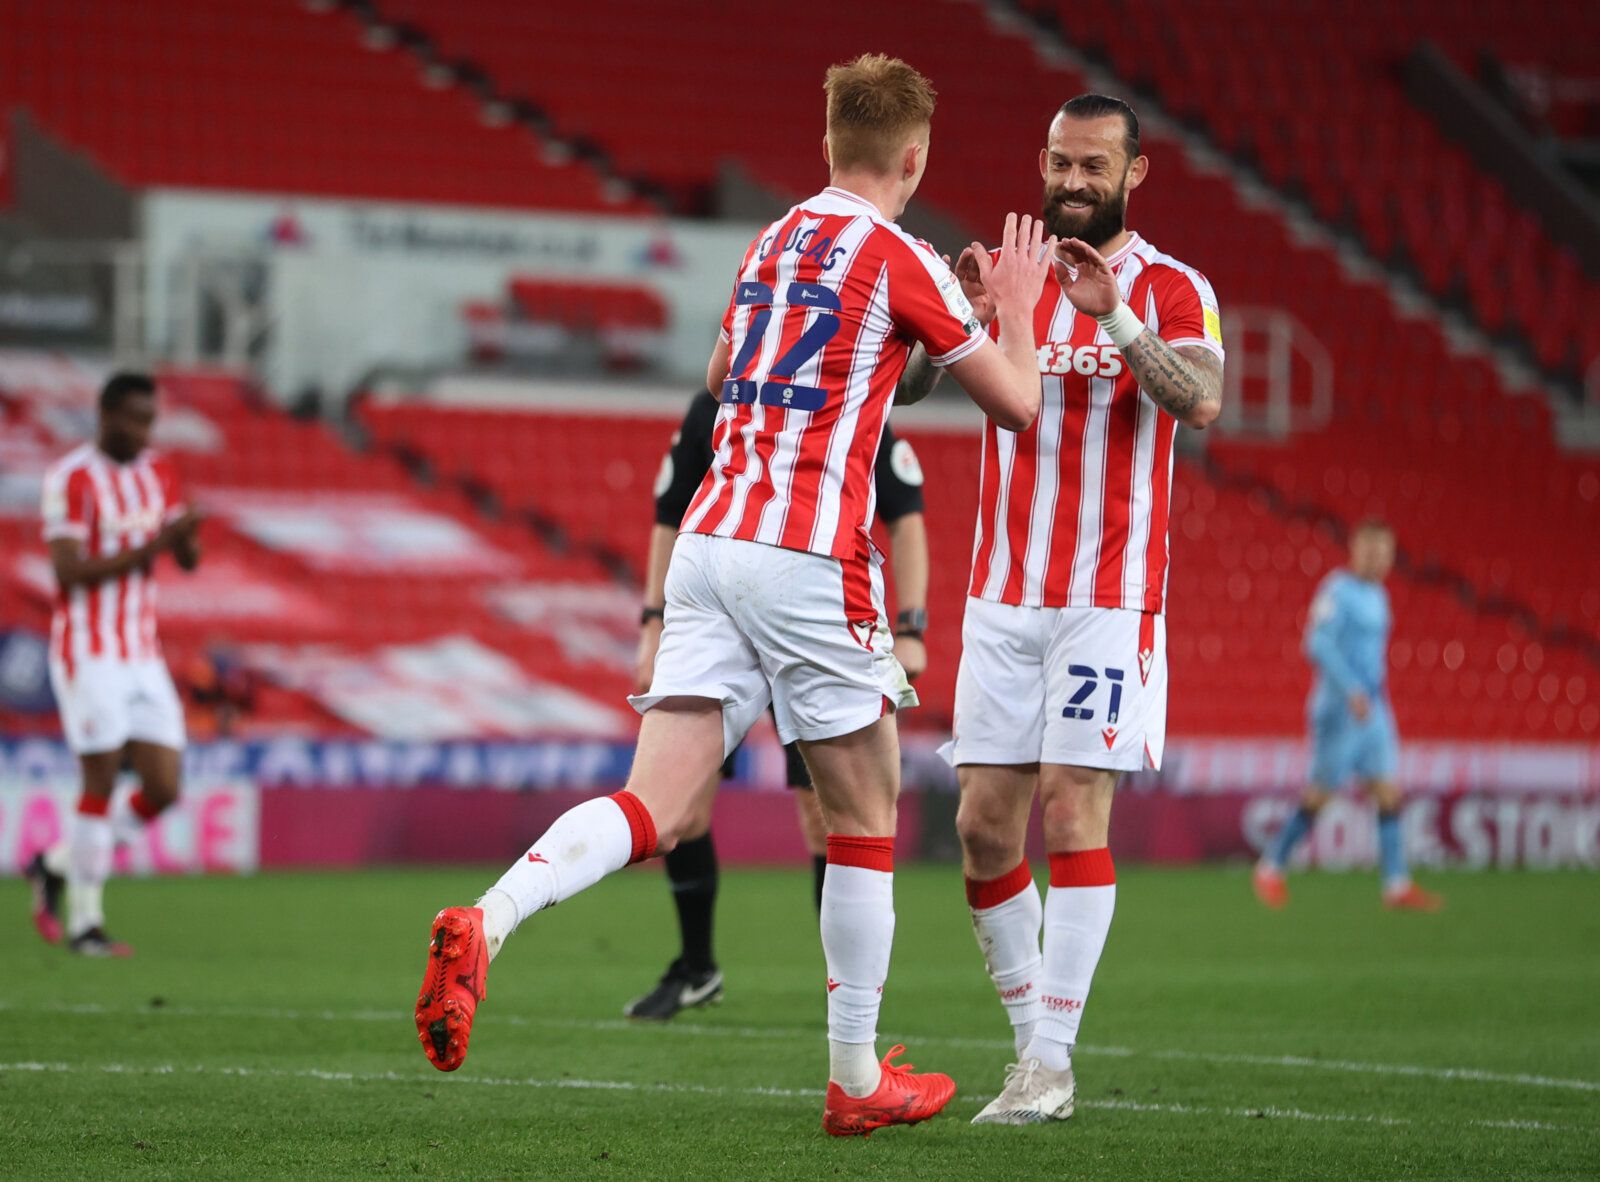 Soccer Football - Championship - Stoke City v Coventry City - bet365 Stadium, Stoke-on-Trent, Britain - April 21, 2021 Stoke City's Sam Clucas celebrates scoring their second goal Action Images/Molly Darlington EDITORIAL USE ONLY. No use with unauthorized audio, video, data, fixture lists, club/league logos or 'live' services. Online in-match use limited to 75 images, no video emulation. No use in betting, games or single club /league/player publications.  Please contact your account representat